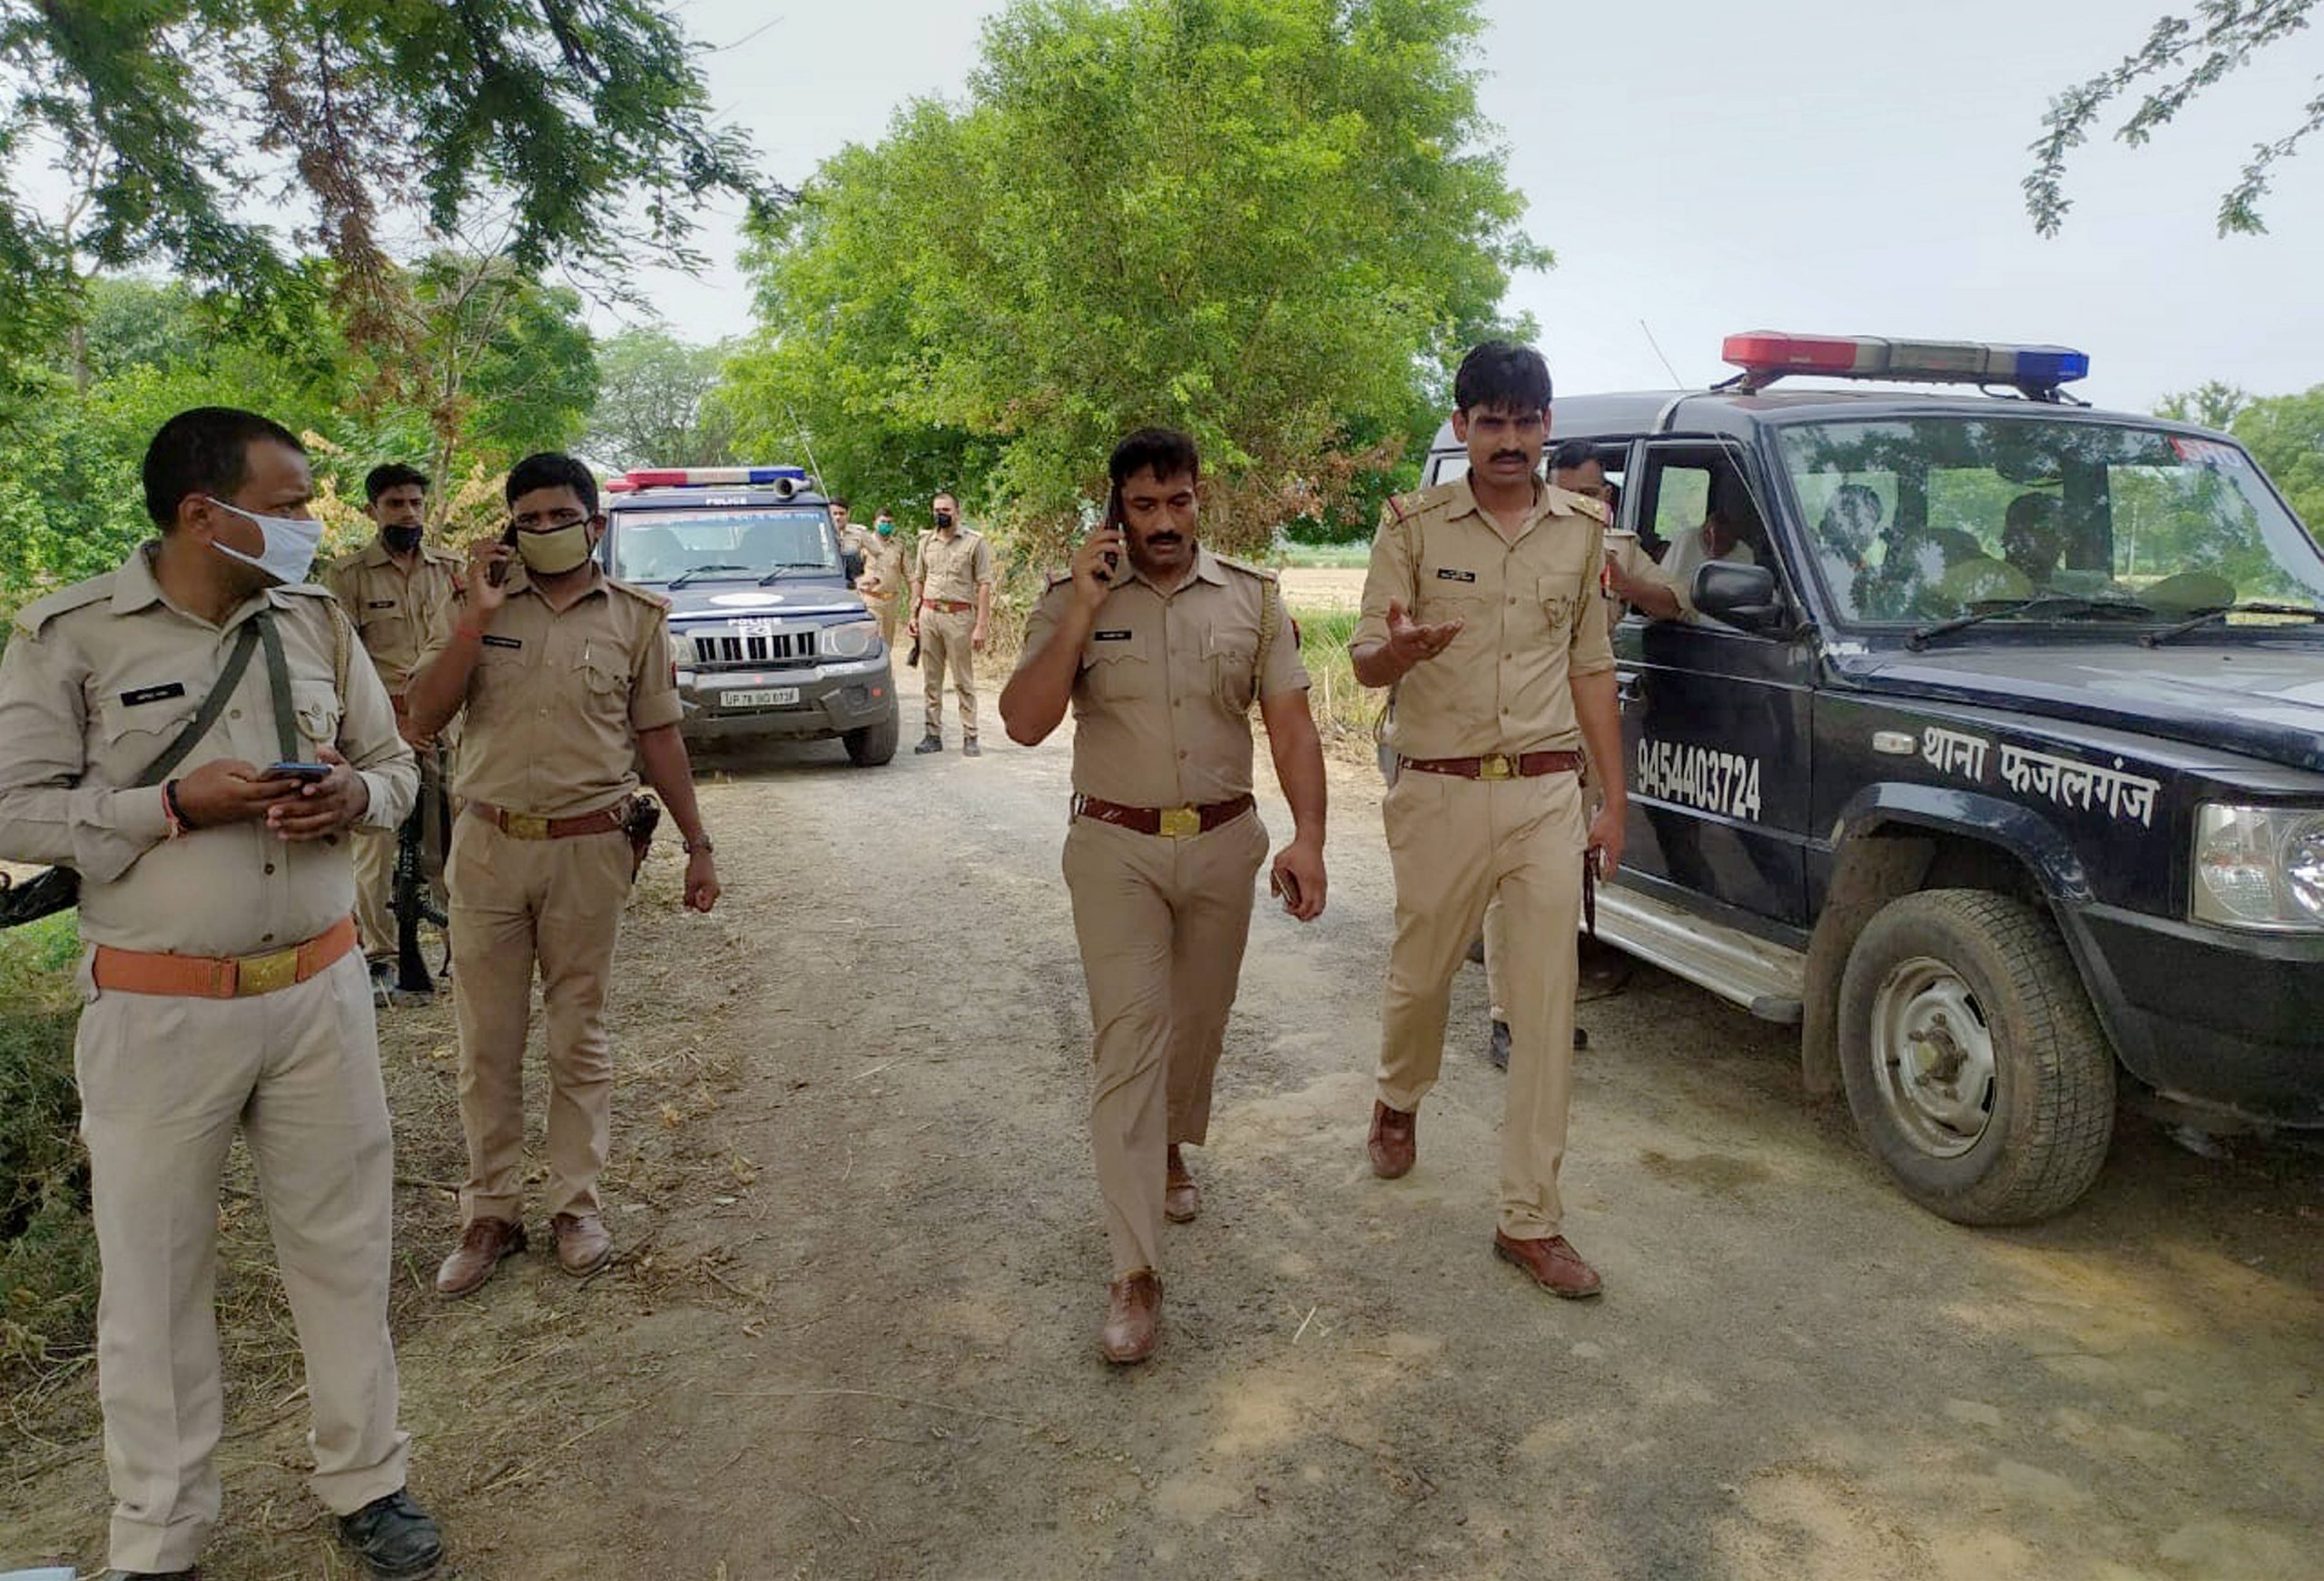 Kanpur firing accused Vikas Dubey’s main aide arrested after a gunfight